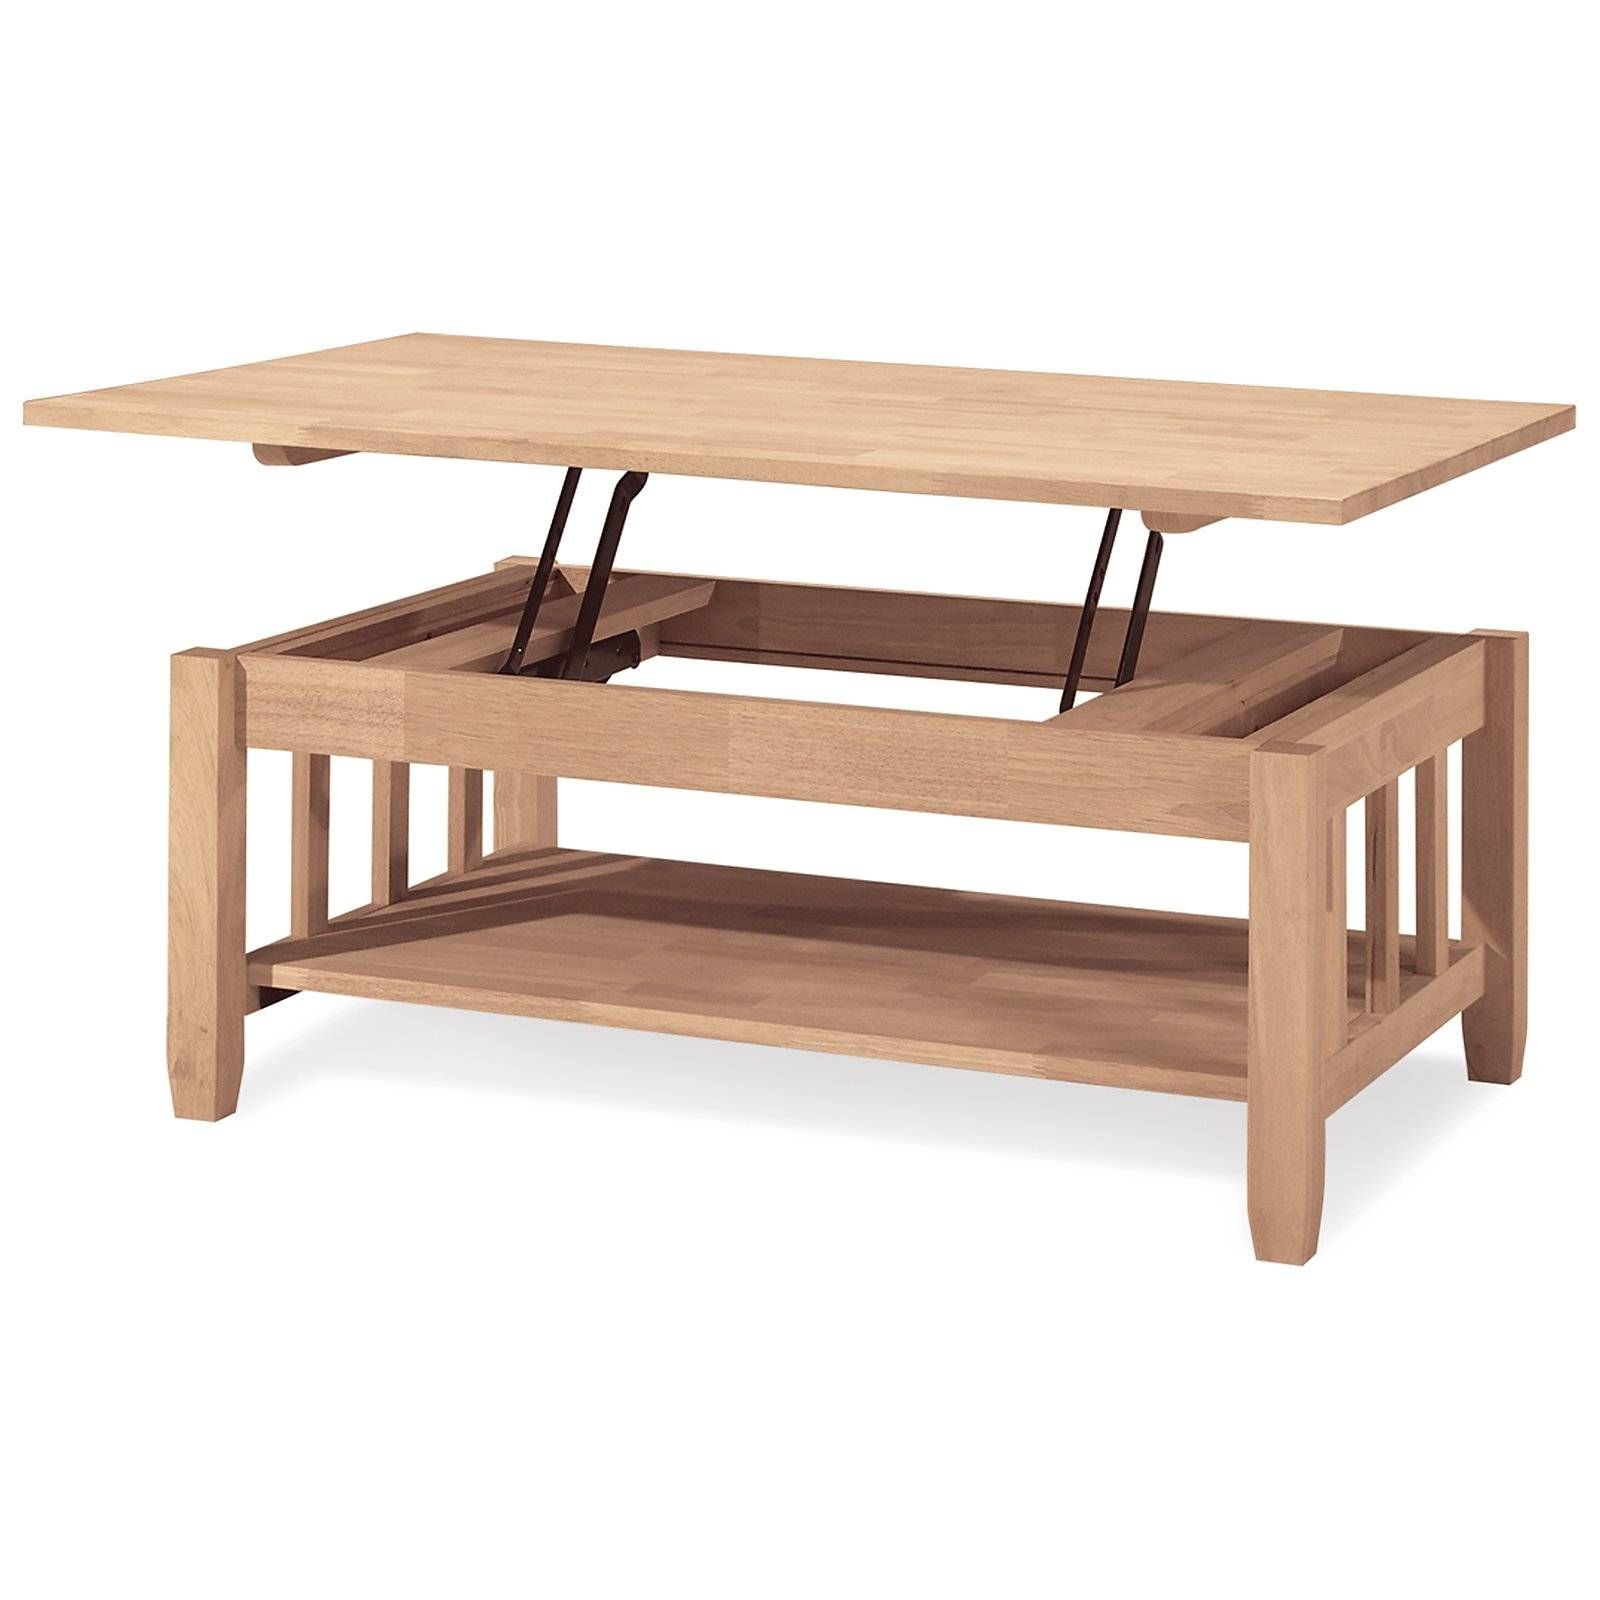 International Concepts Mission Solid Wood Lift Top Coffee Table Throughout Lift Up Top Coffee Tables (View 11 of 30)